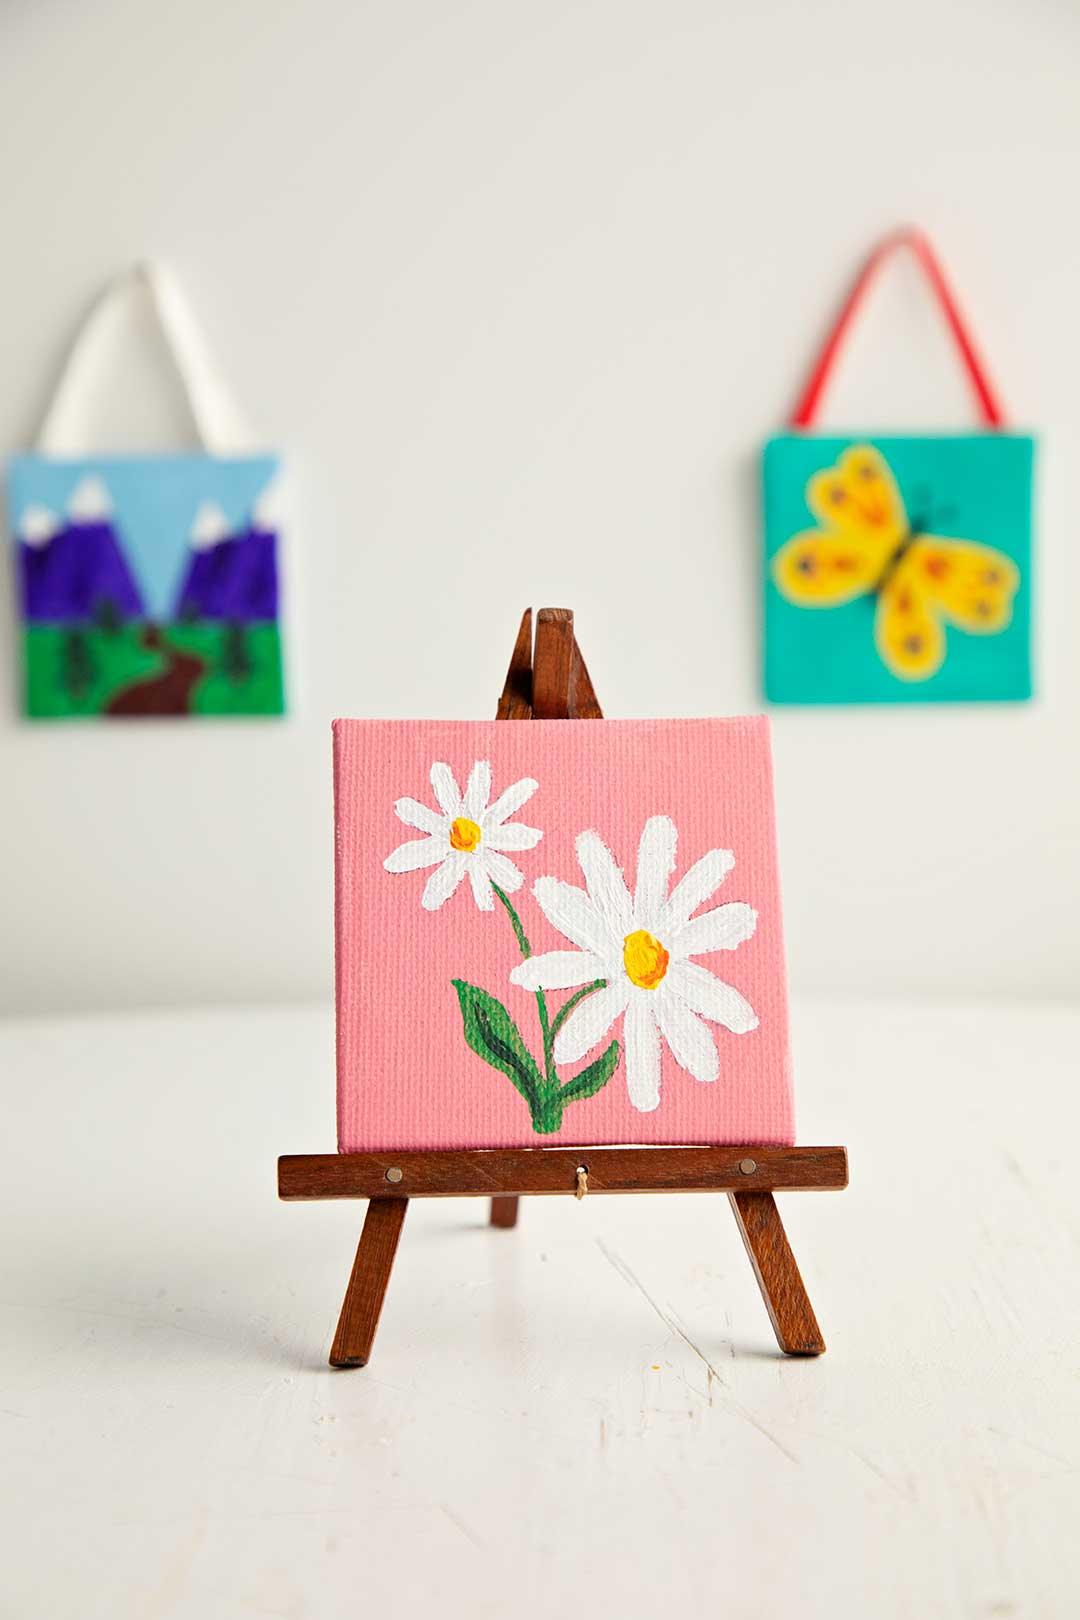 Tiny Canvas Painting Ideas Video - Welcome To Nana's